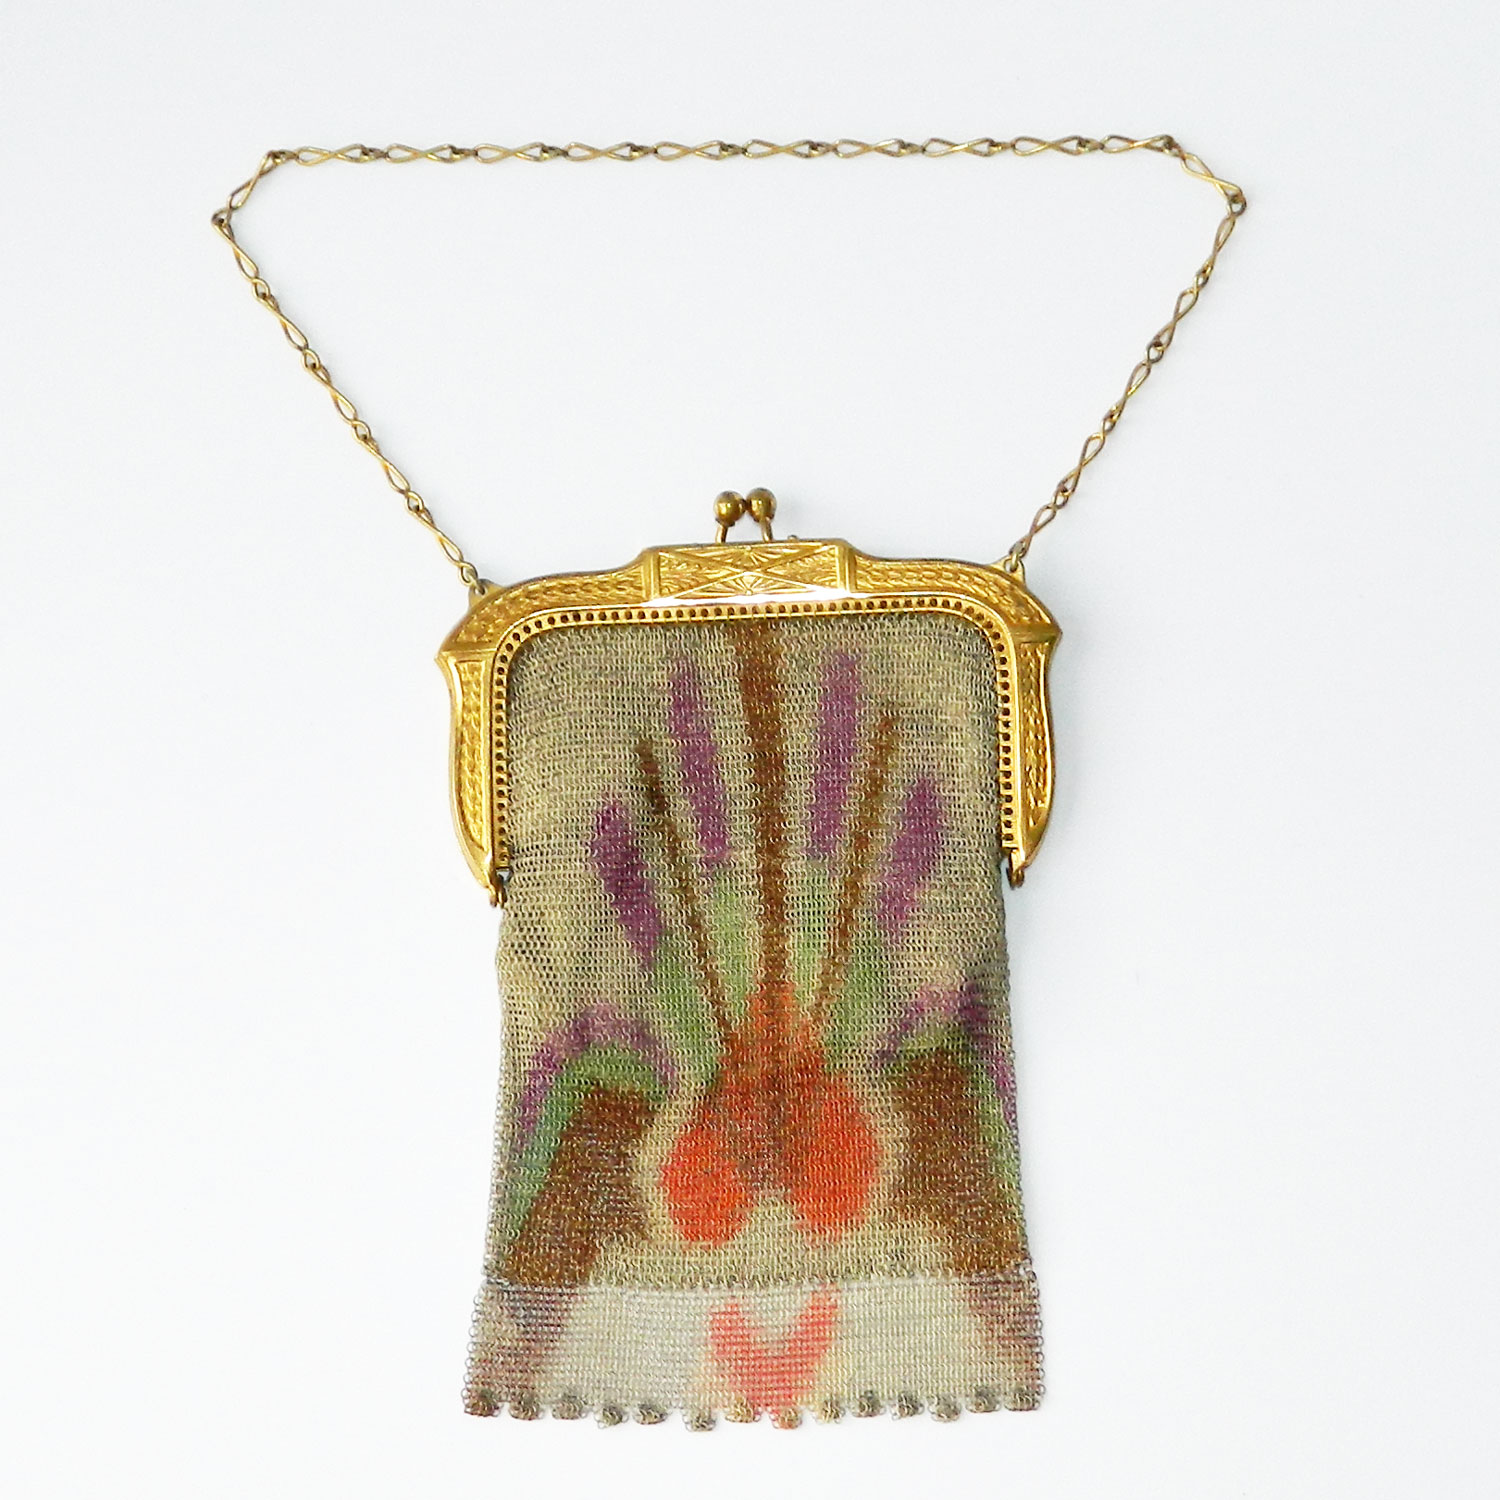 1920's air brushed mesh purse